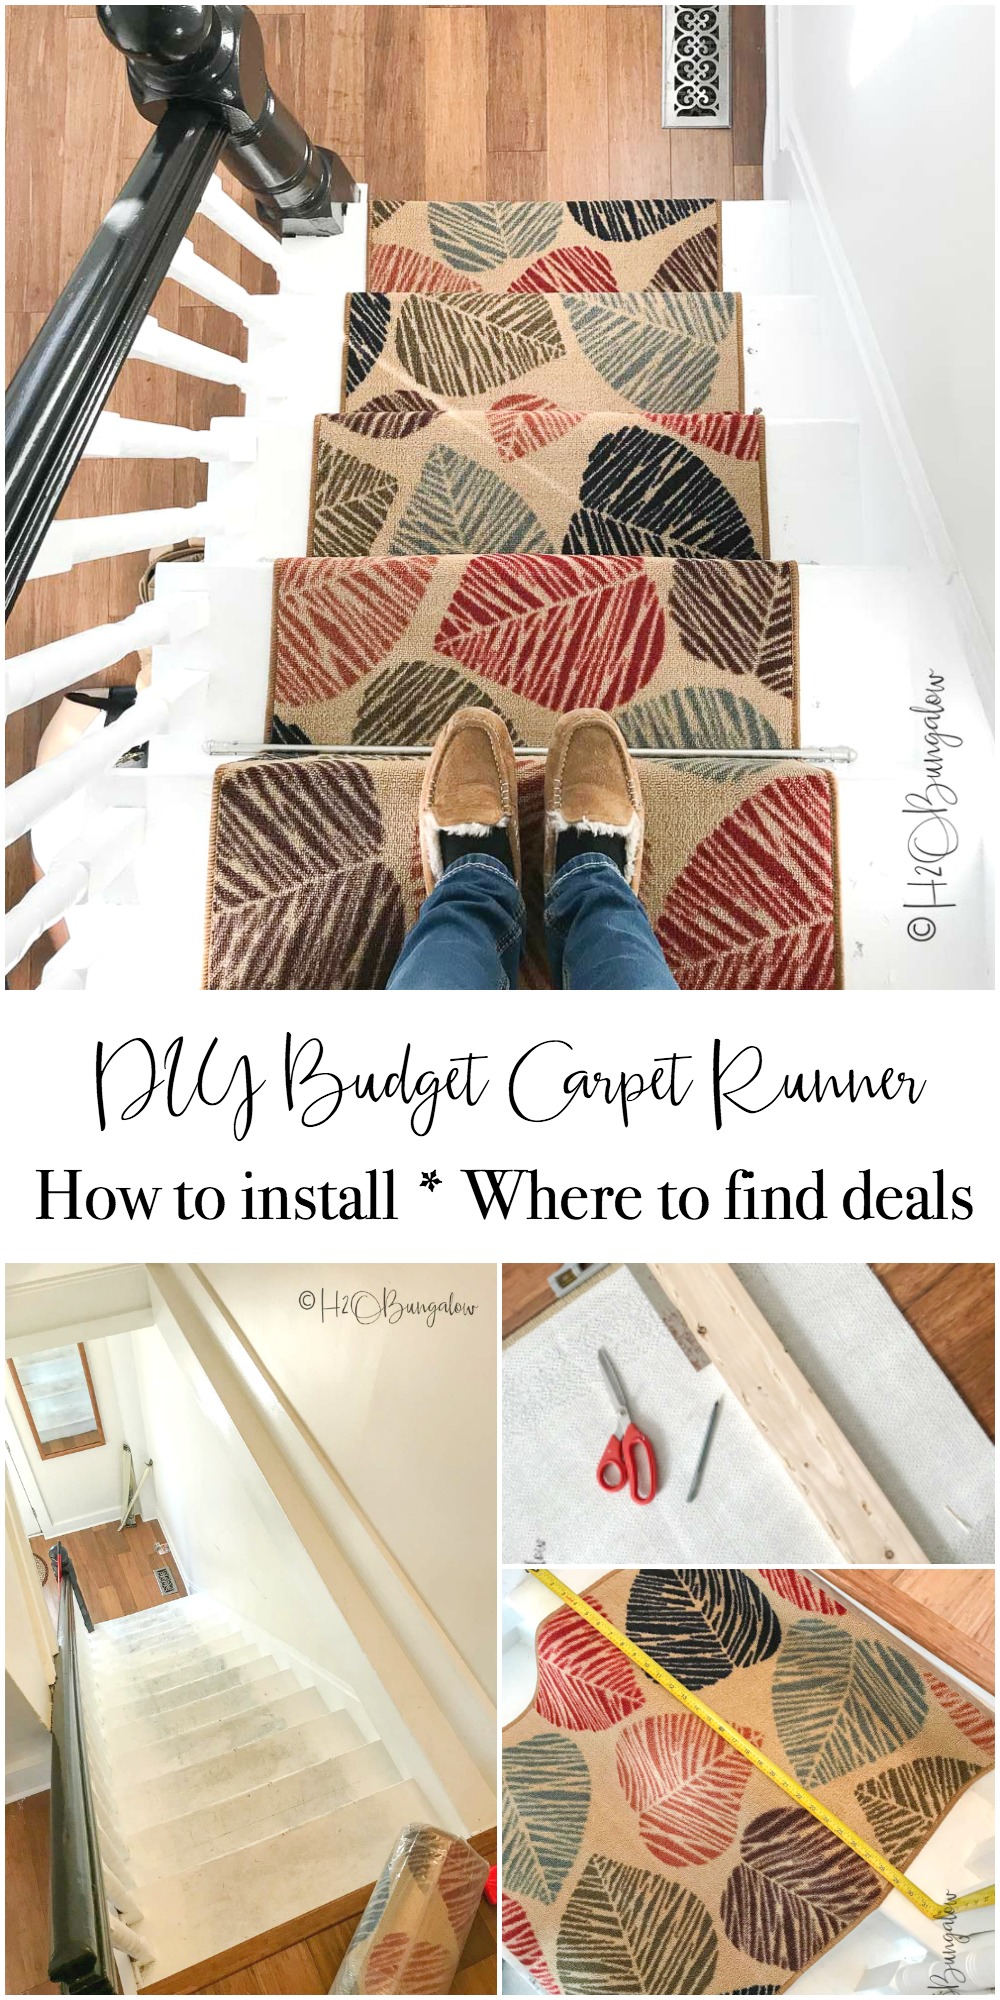 DIY Tutorial on how to install carpet runner on stairs and wood steps with or without adding stair rods.  Links to find quality material at budget prices too